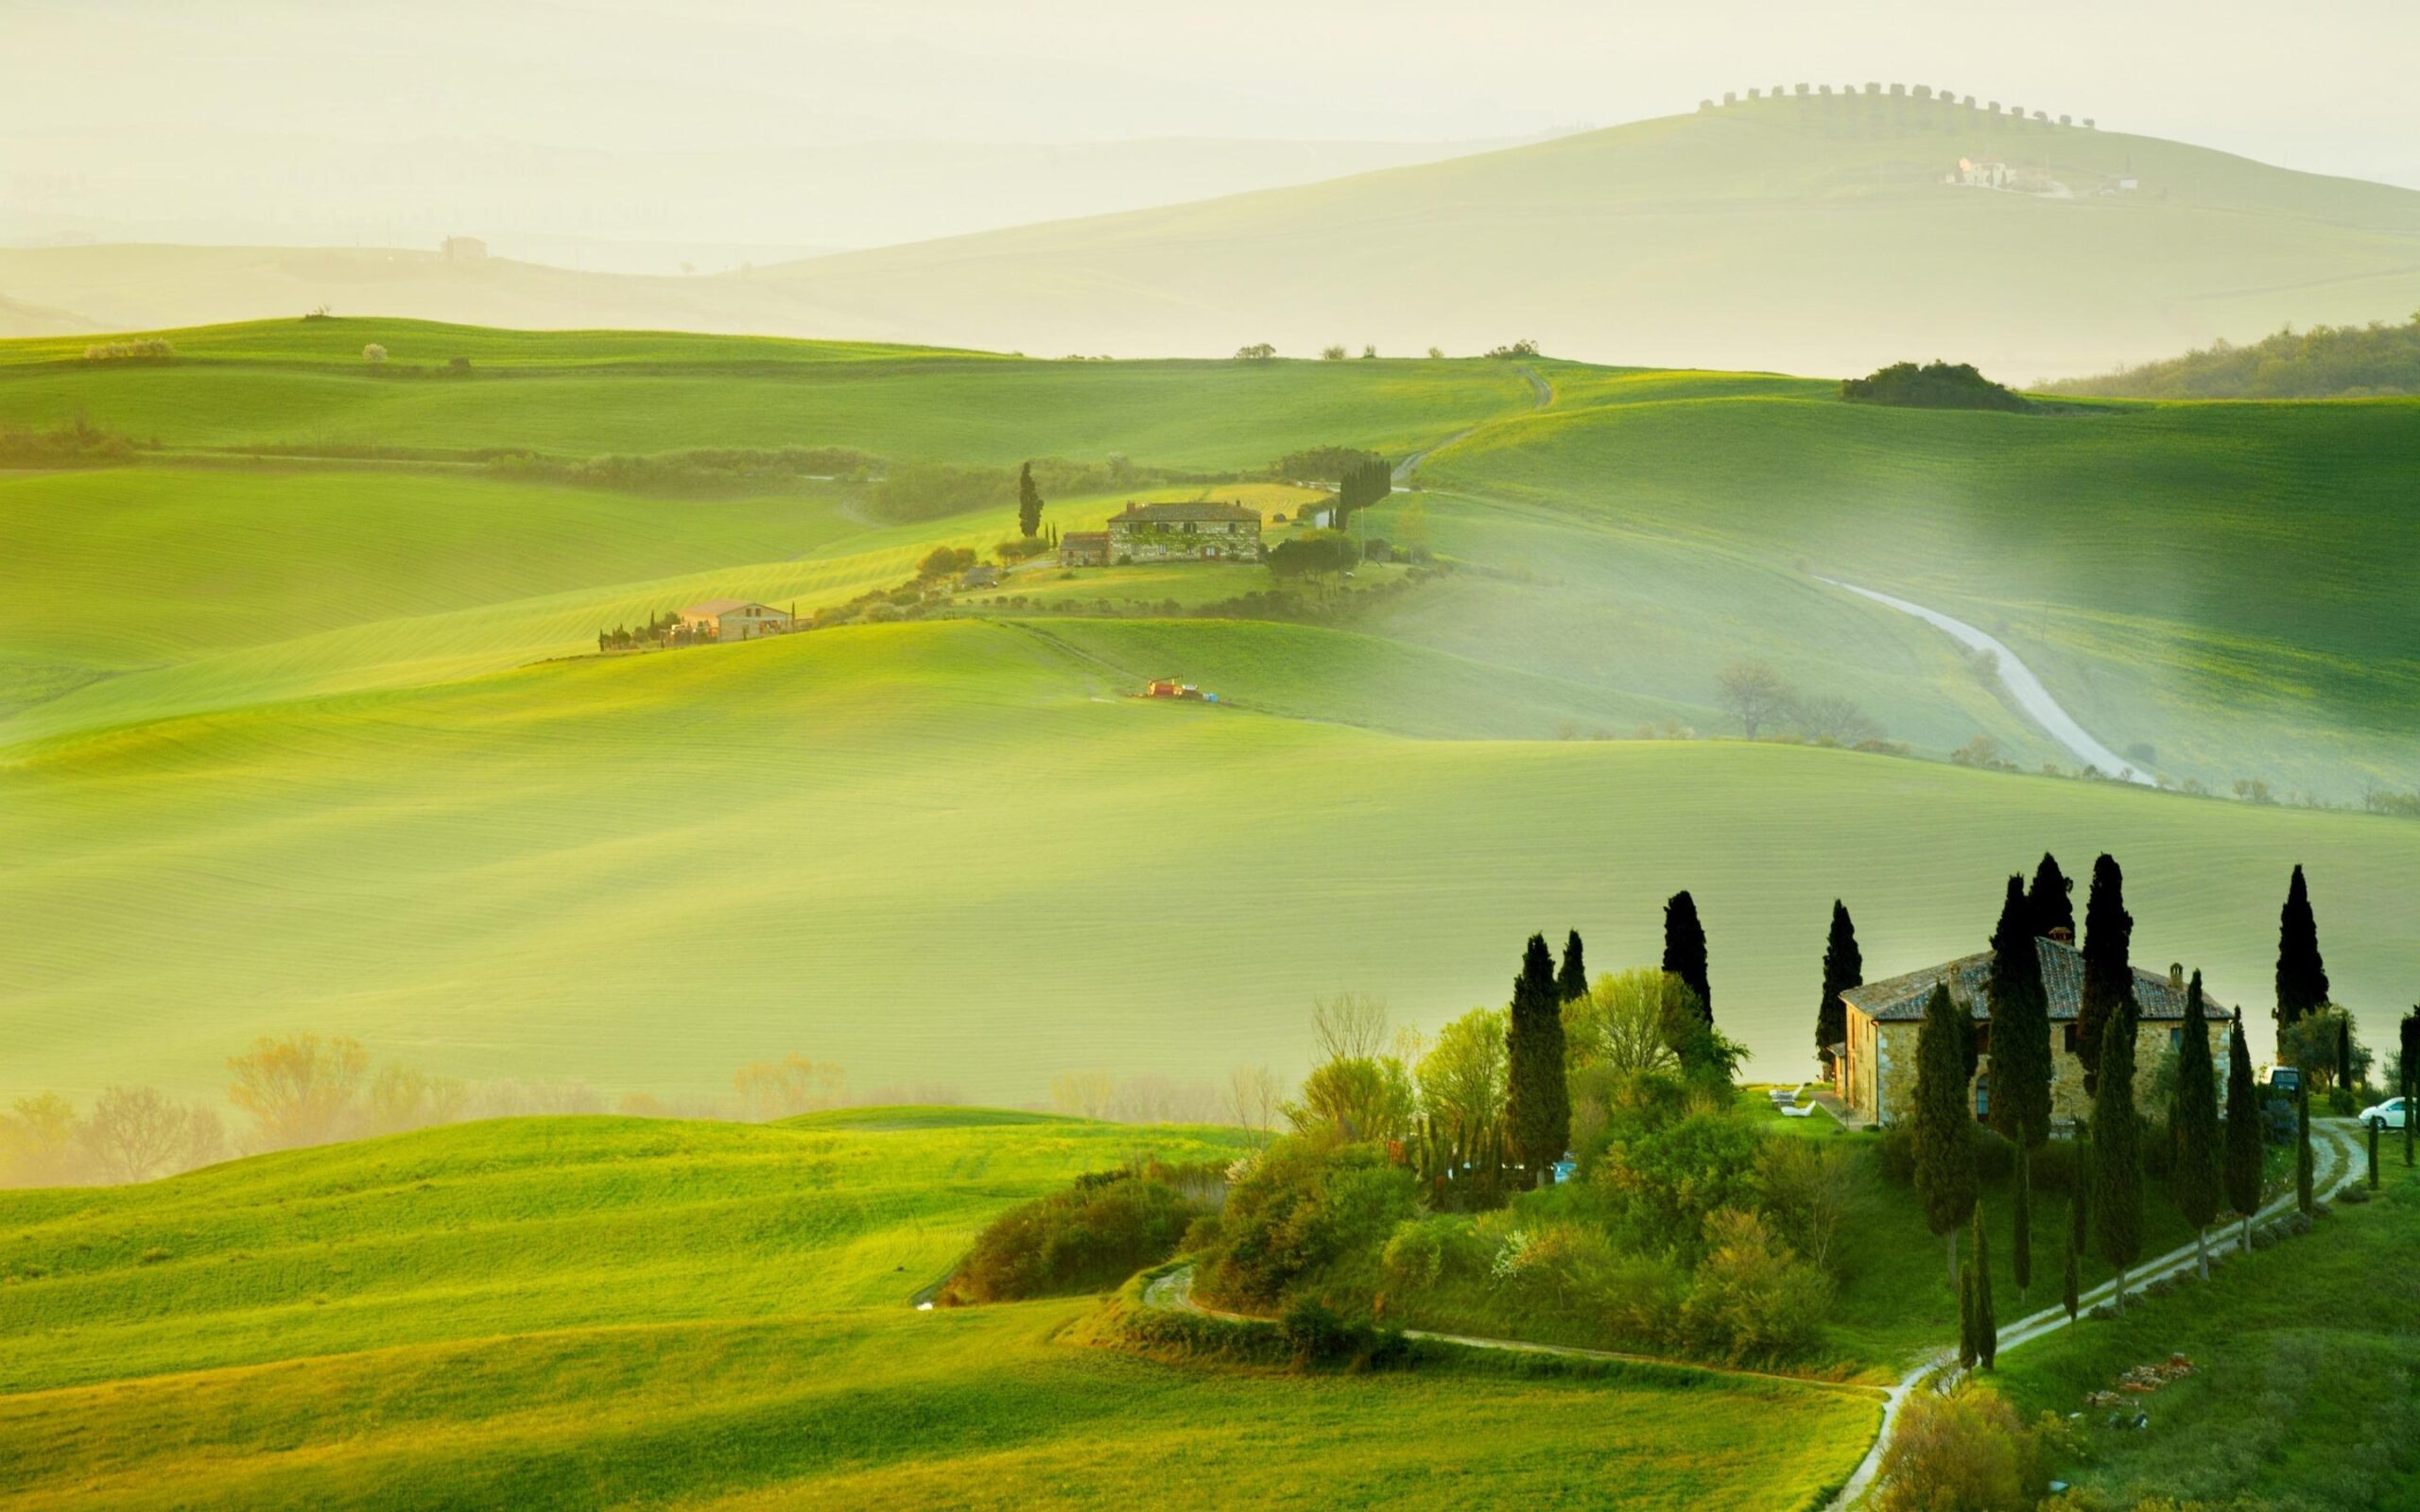 Wallpapers Tuscany, countryside, Italy, nature, trees, green fields